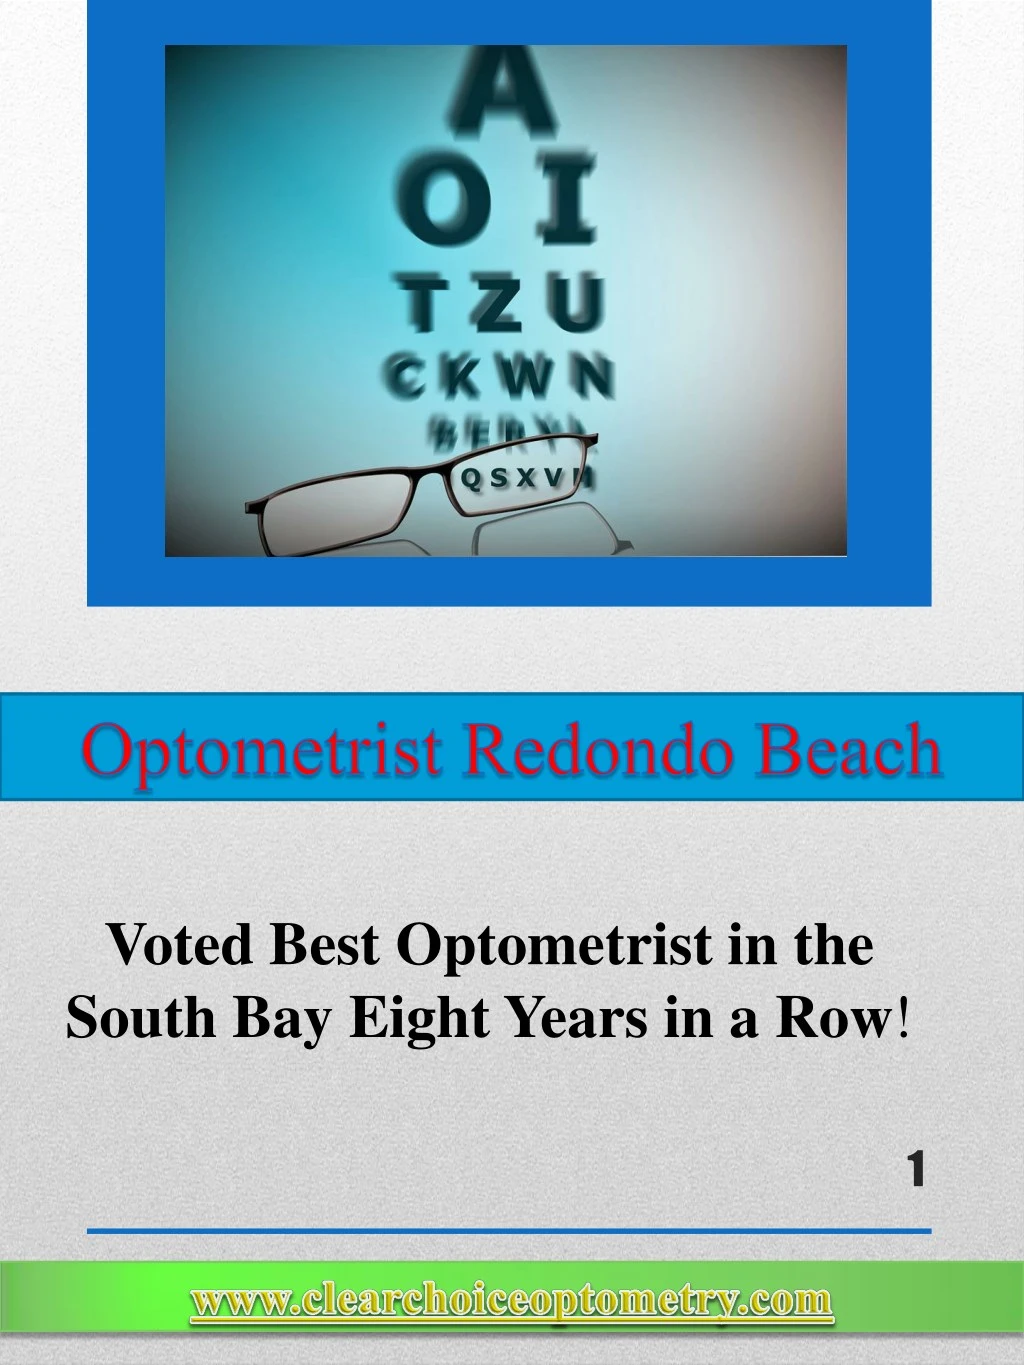 voted best optometrist in the south bay eight